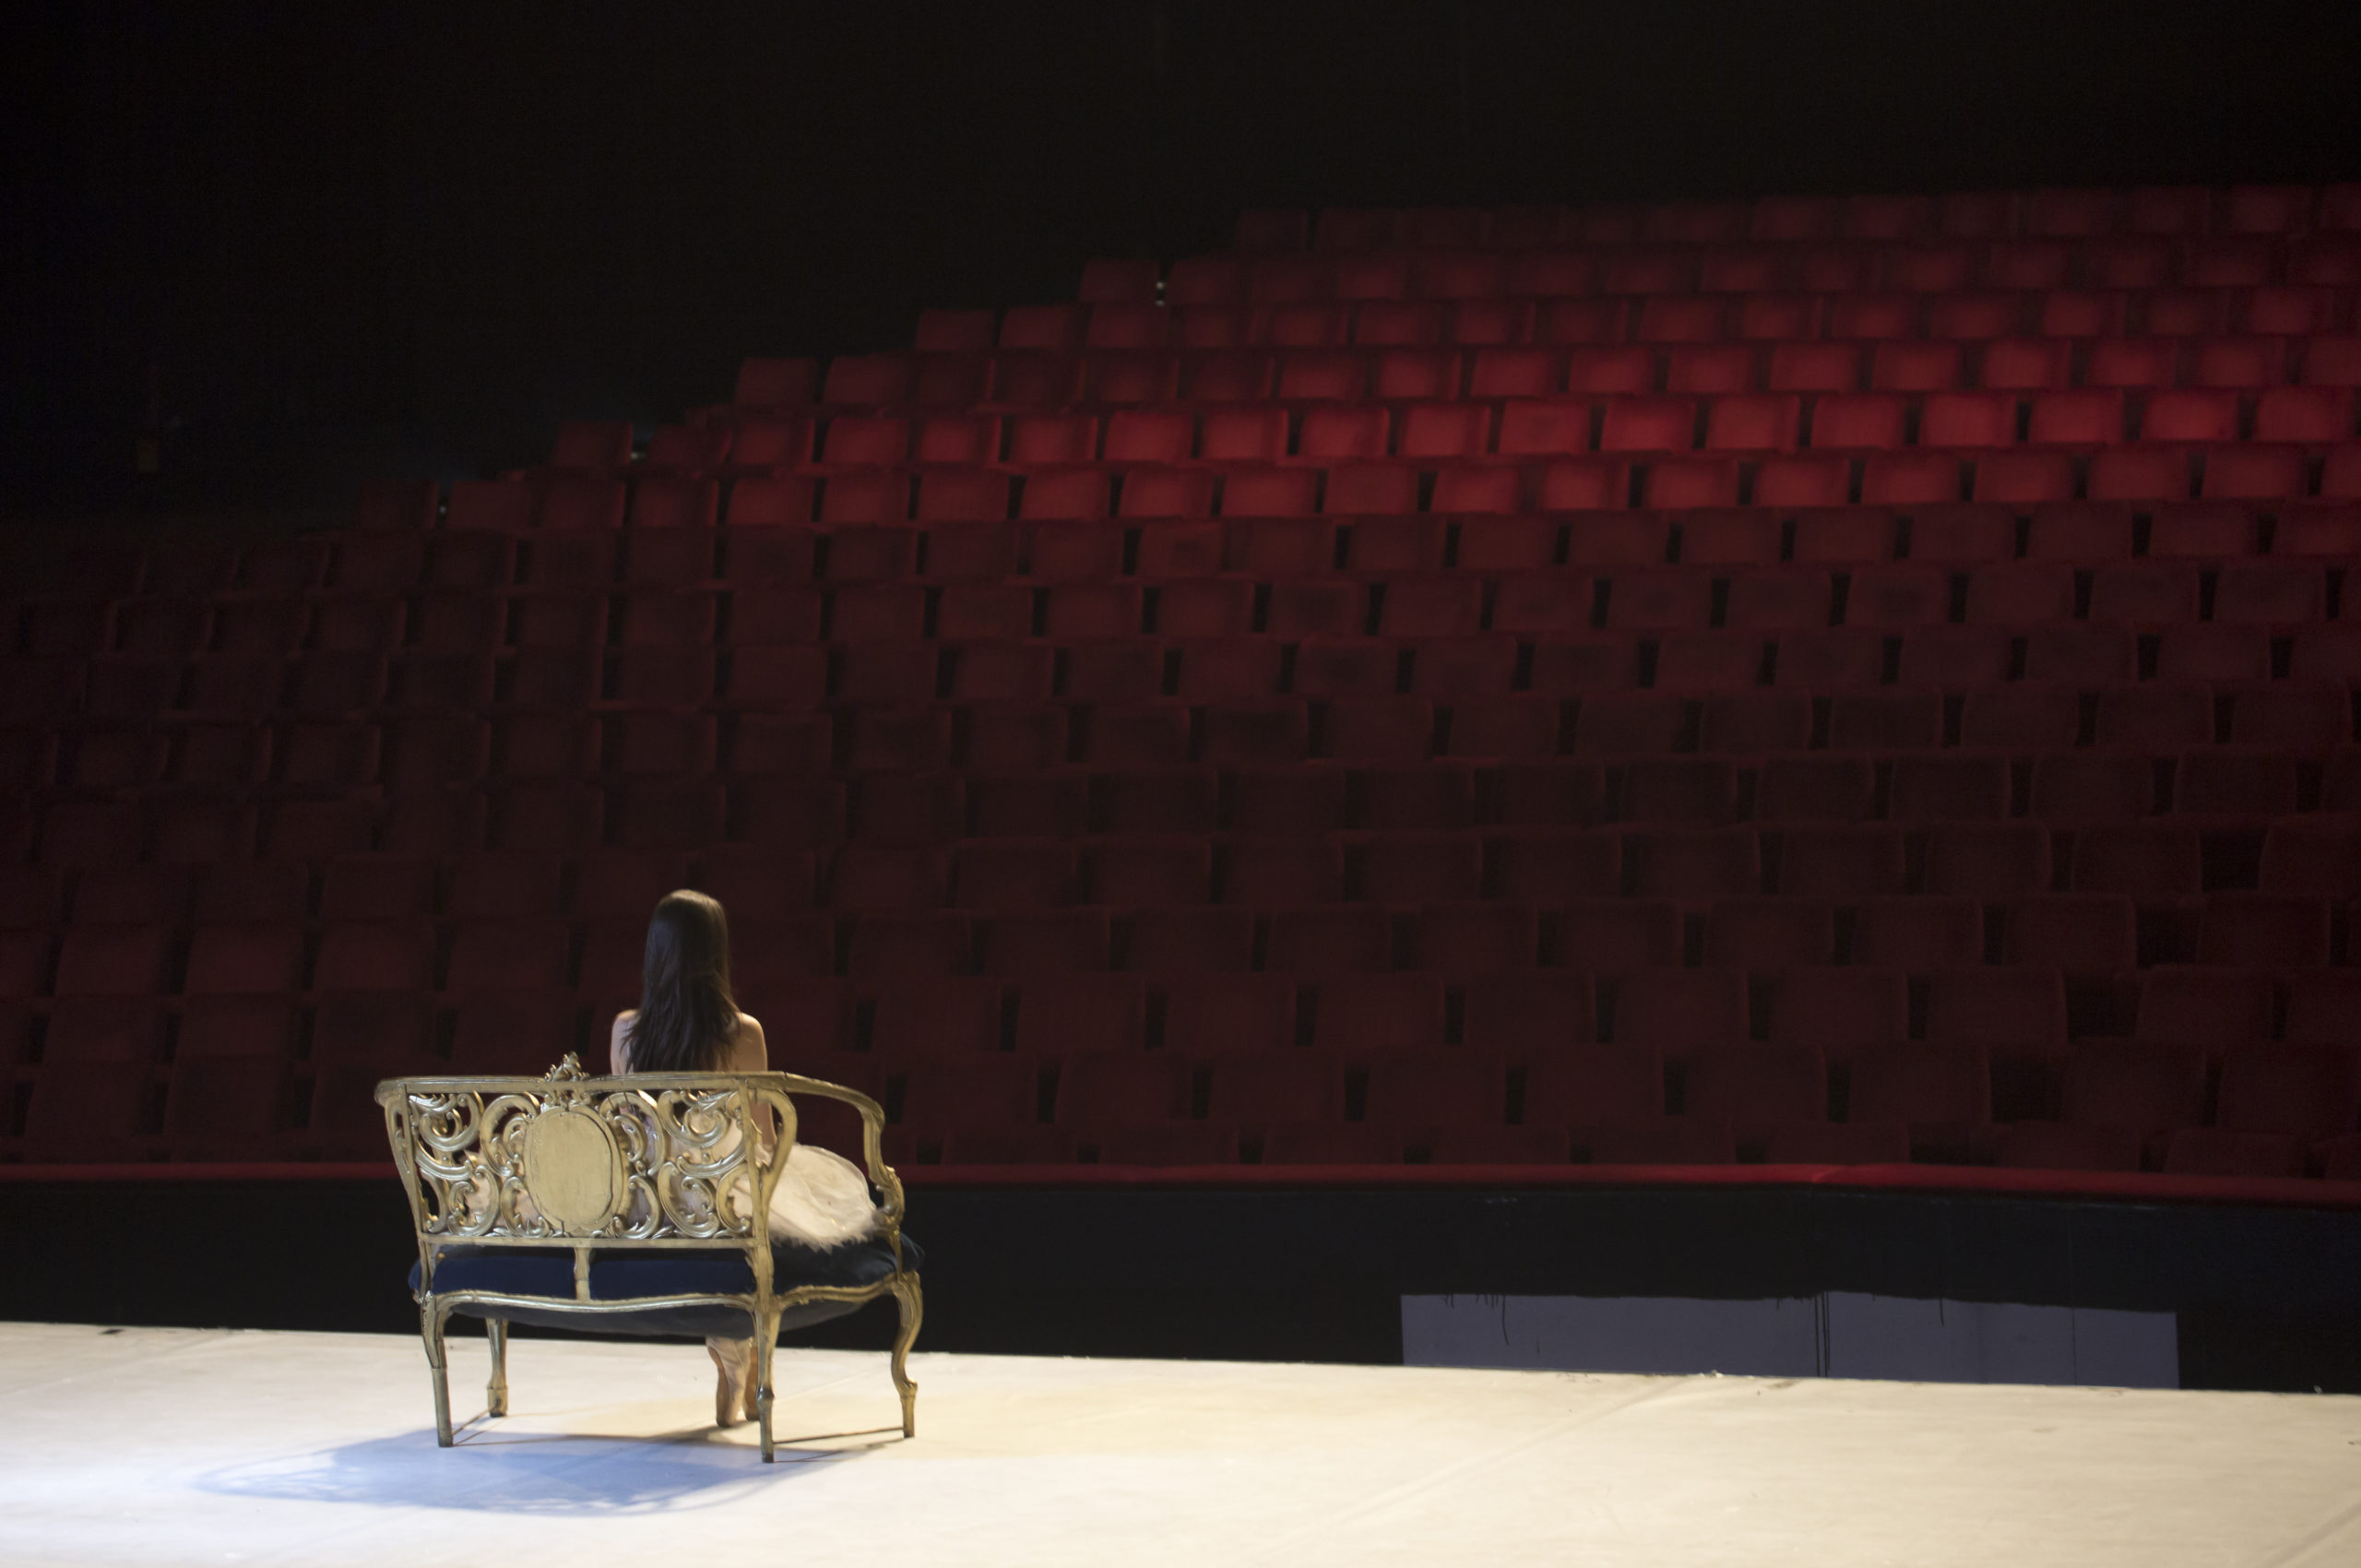 Young ballerina in a large theater is shown sitting on a bench in costume, looking out at the empty seats in front of her.